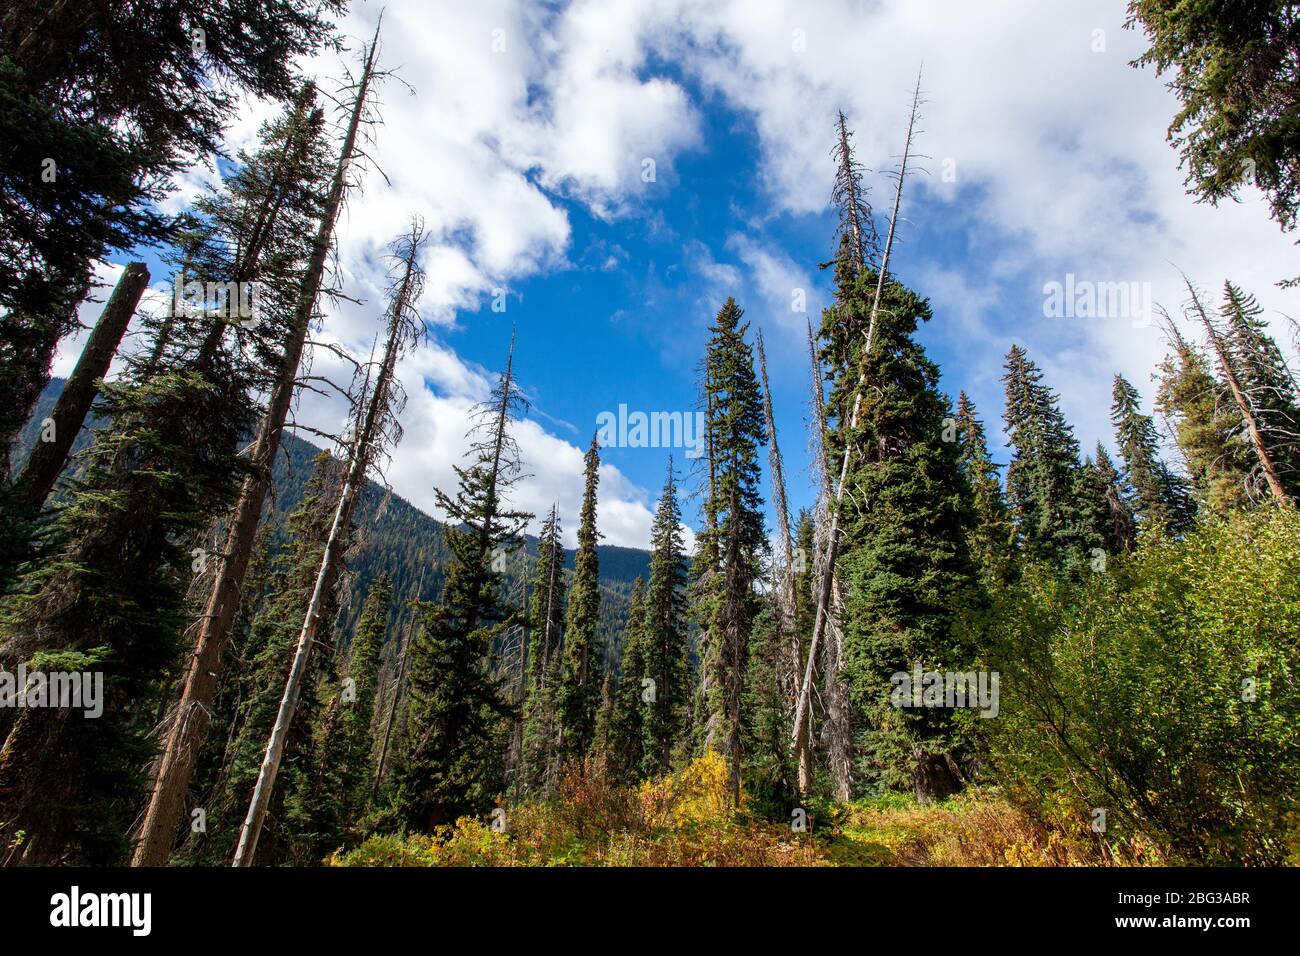 Western larch trees point into a blue sky with white clouds, with a forest-covered mountainside in the background, in North Cascades National Park Stock Photo